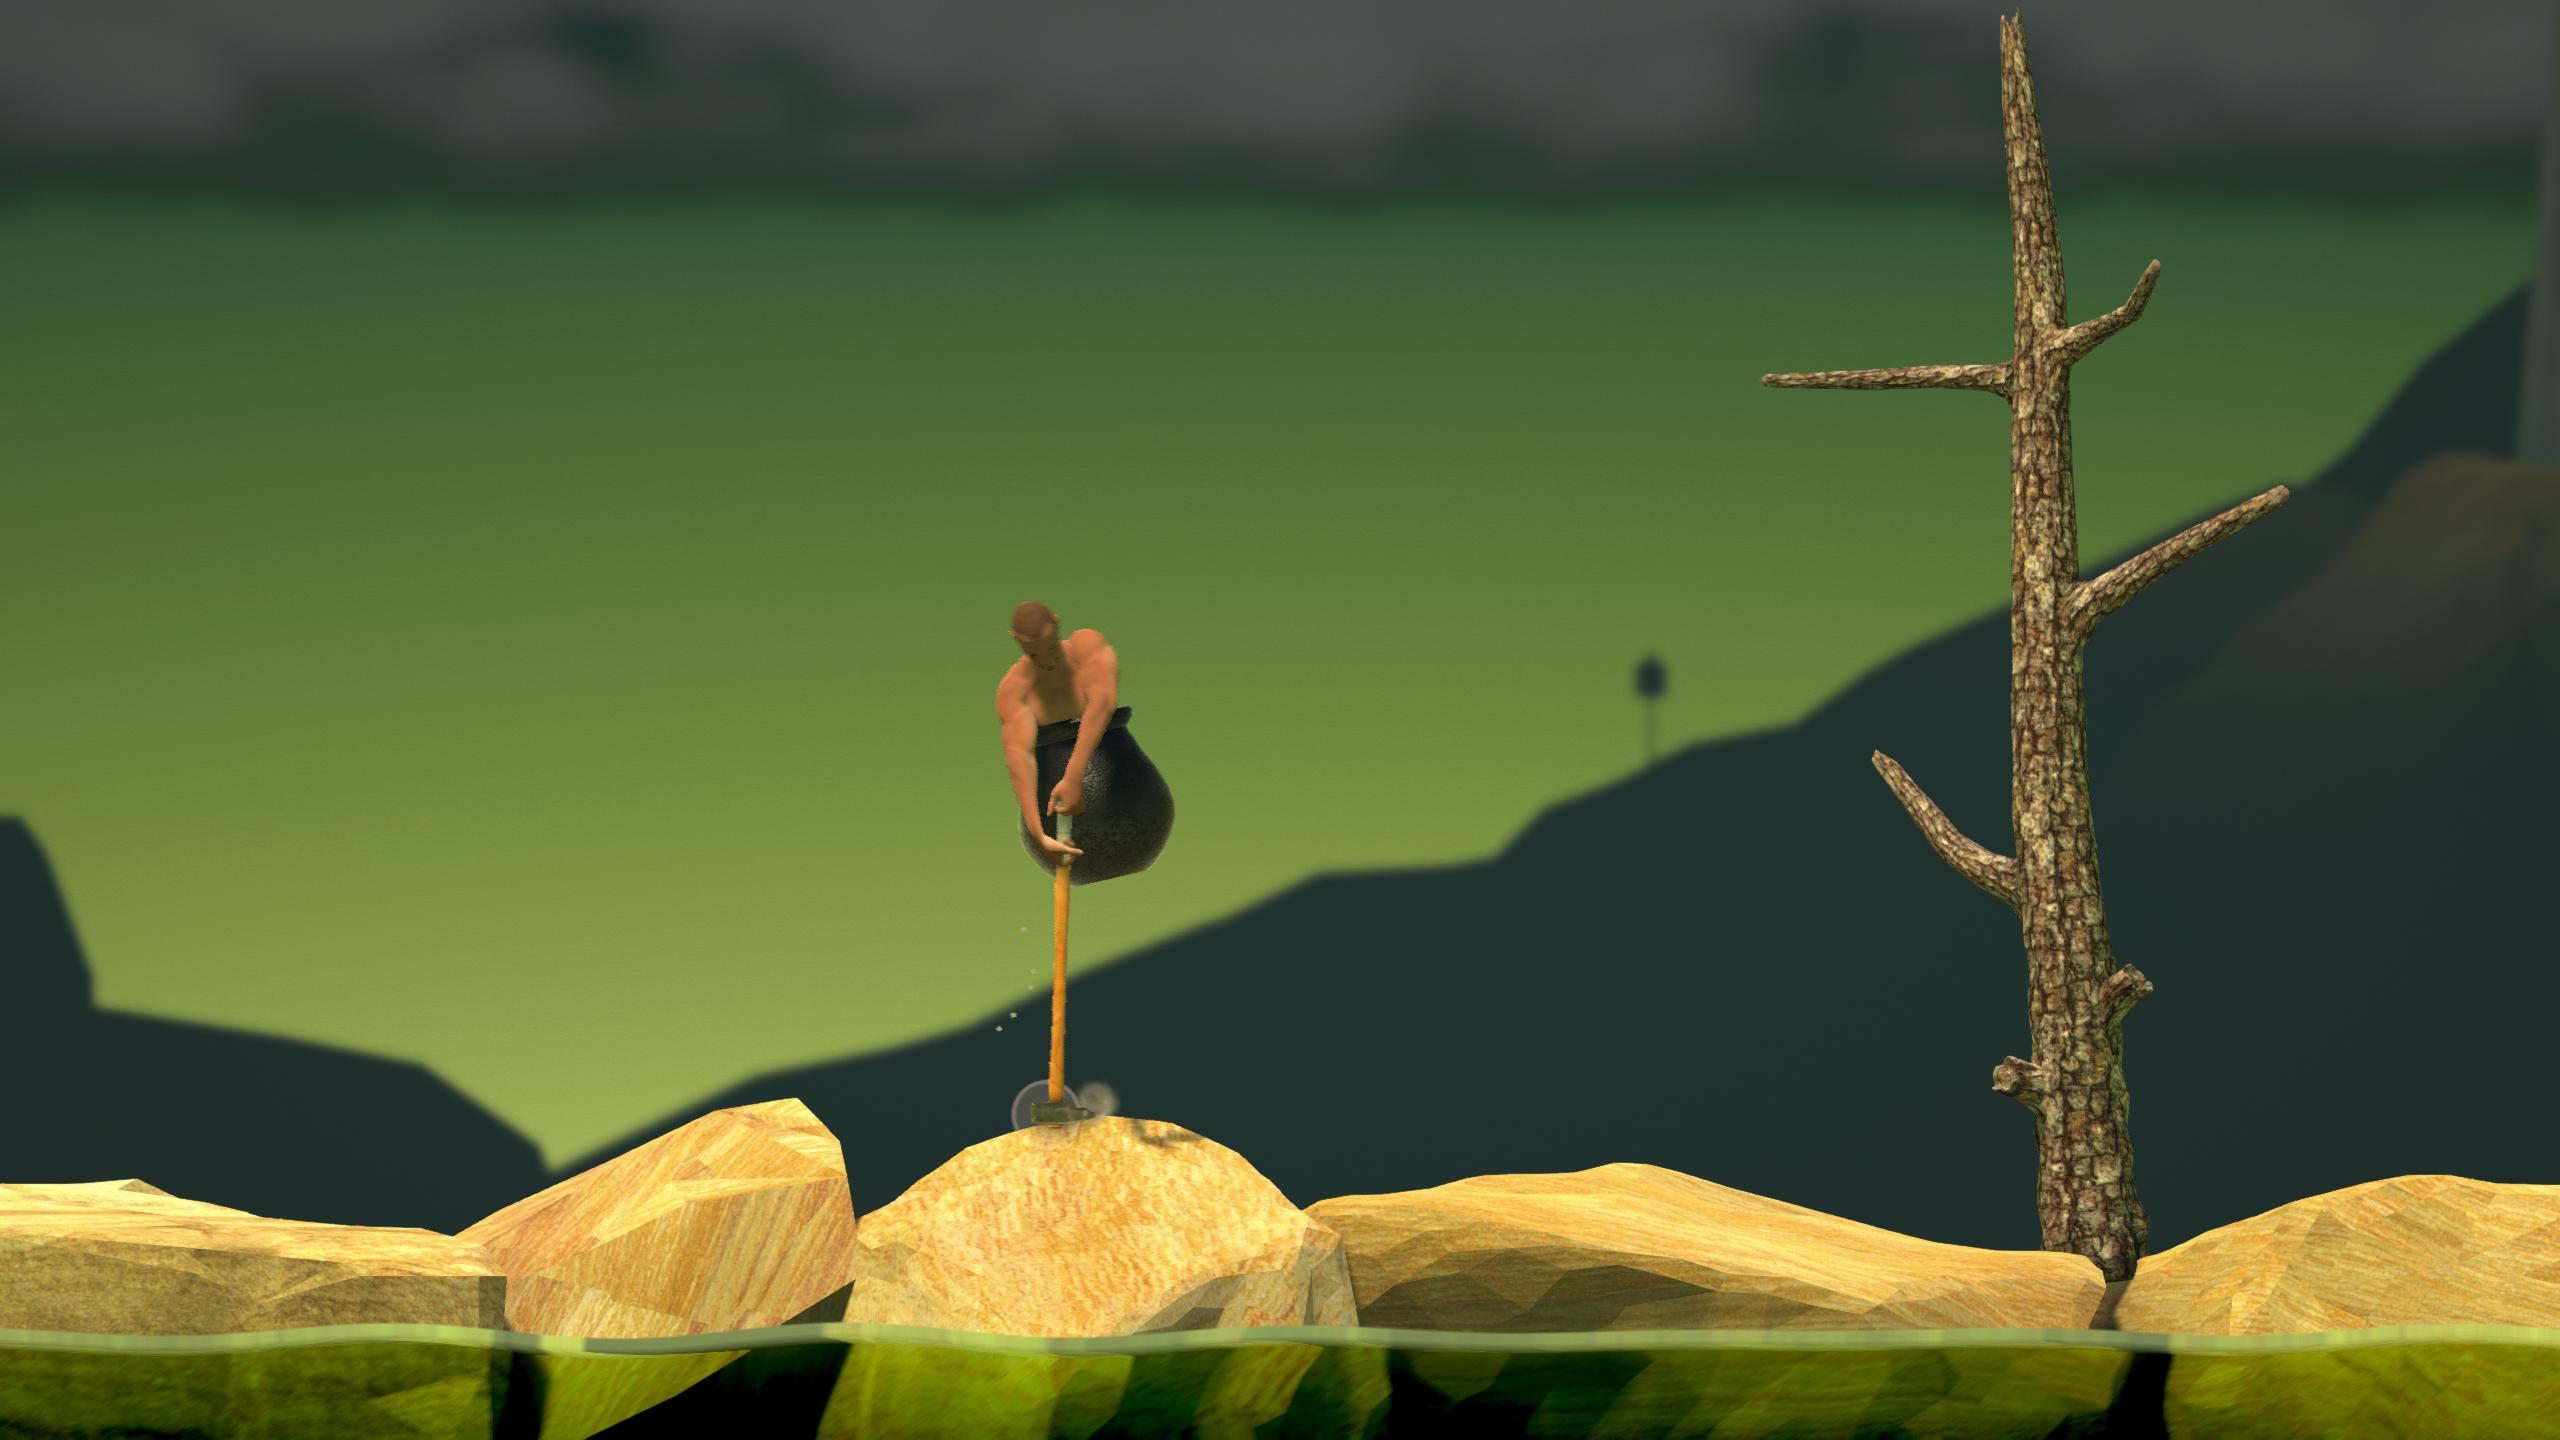 Getting Over It with Bennett Foddy –